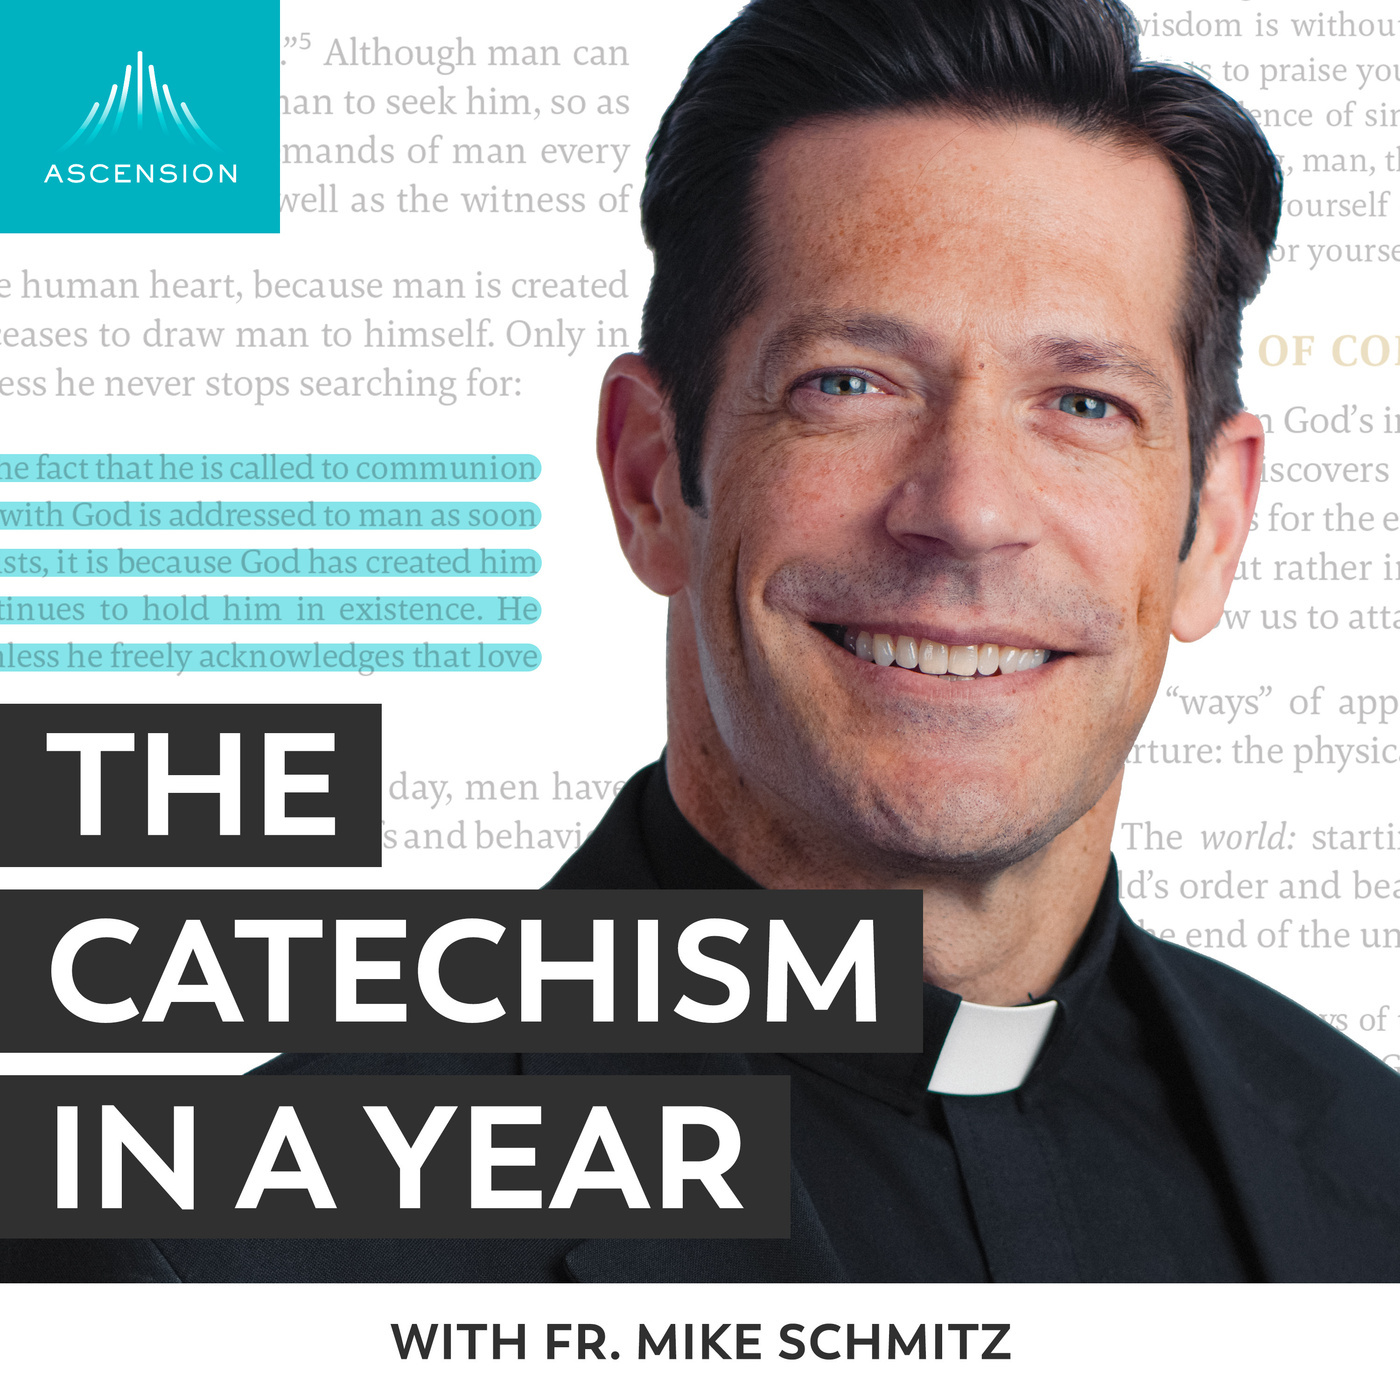 The Catechism in a Year (with Fr. Mike Schmitz): Day 149: The Holy Spirit Recalls Christ’s Mystery